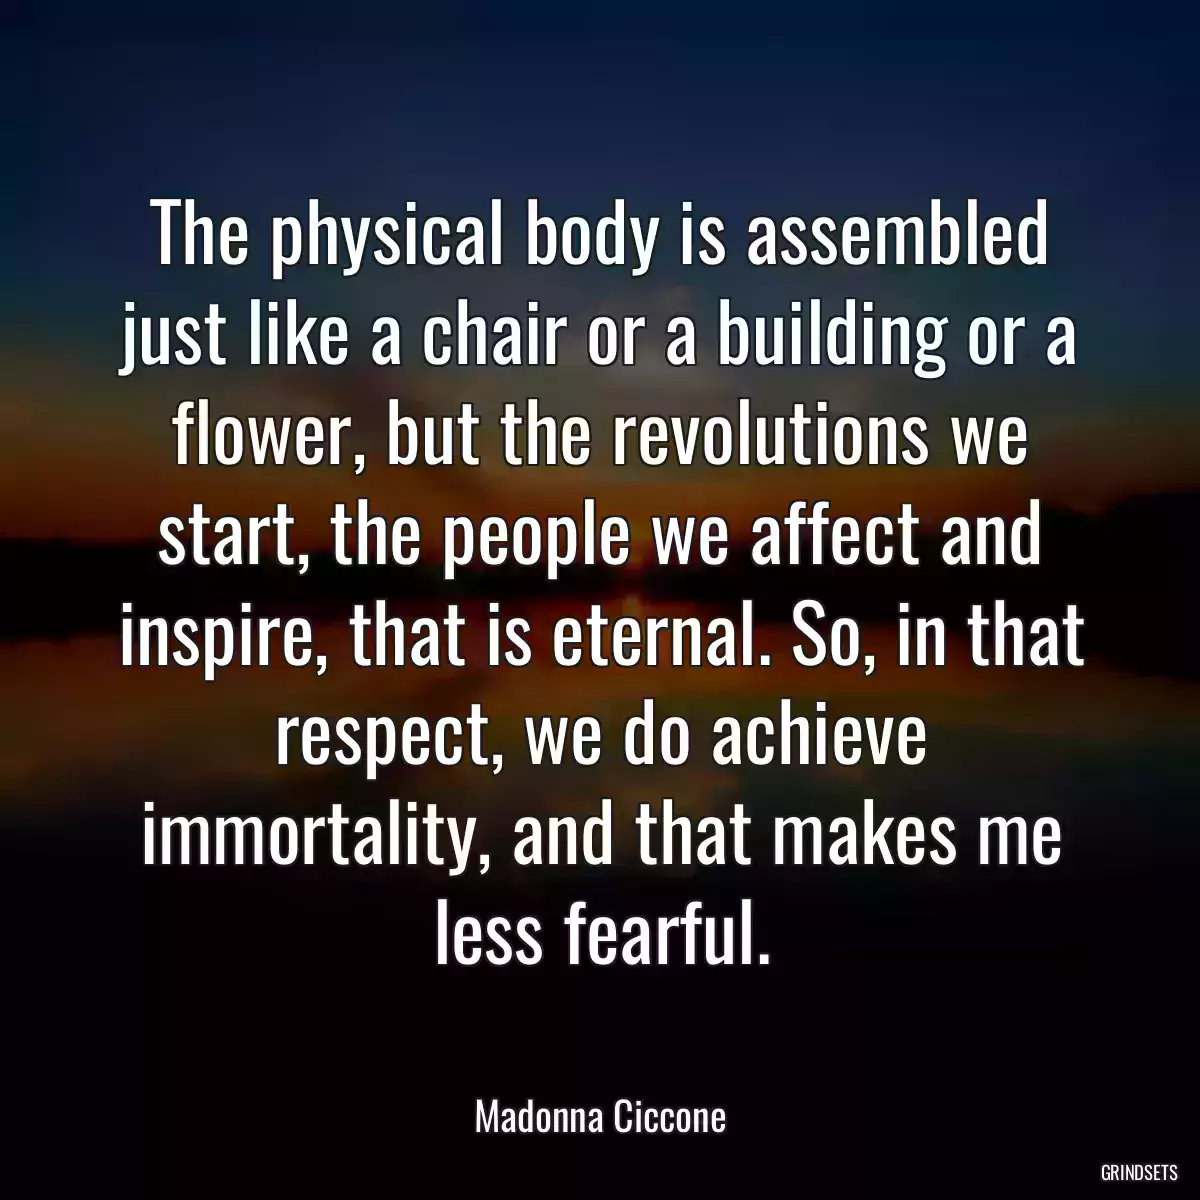 The physical body is assembled just like a chair or a building or a flower, but the revolutions we start, the people we affect and inspire, that is eternal. So, in that respect, we do achieve immortality, and that makes me less fearful.